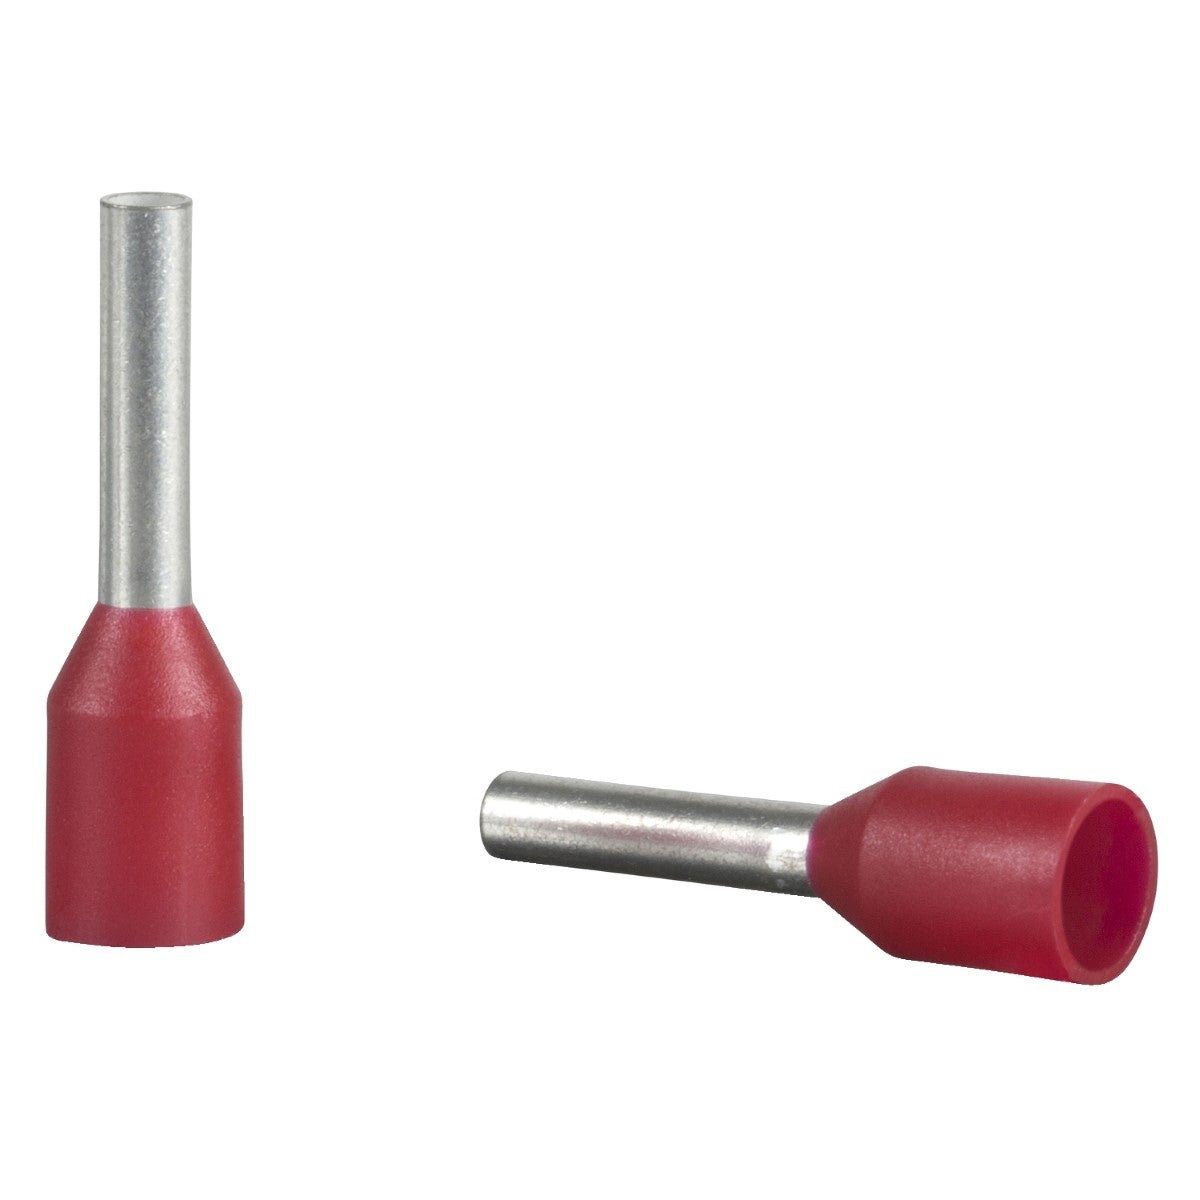 Cable ends, Linergy TR cable ends, single conductor, red, 1mm², medium size, 10 sets of 100